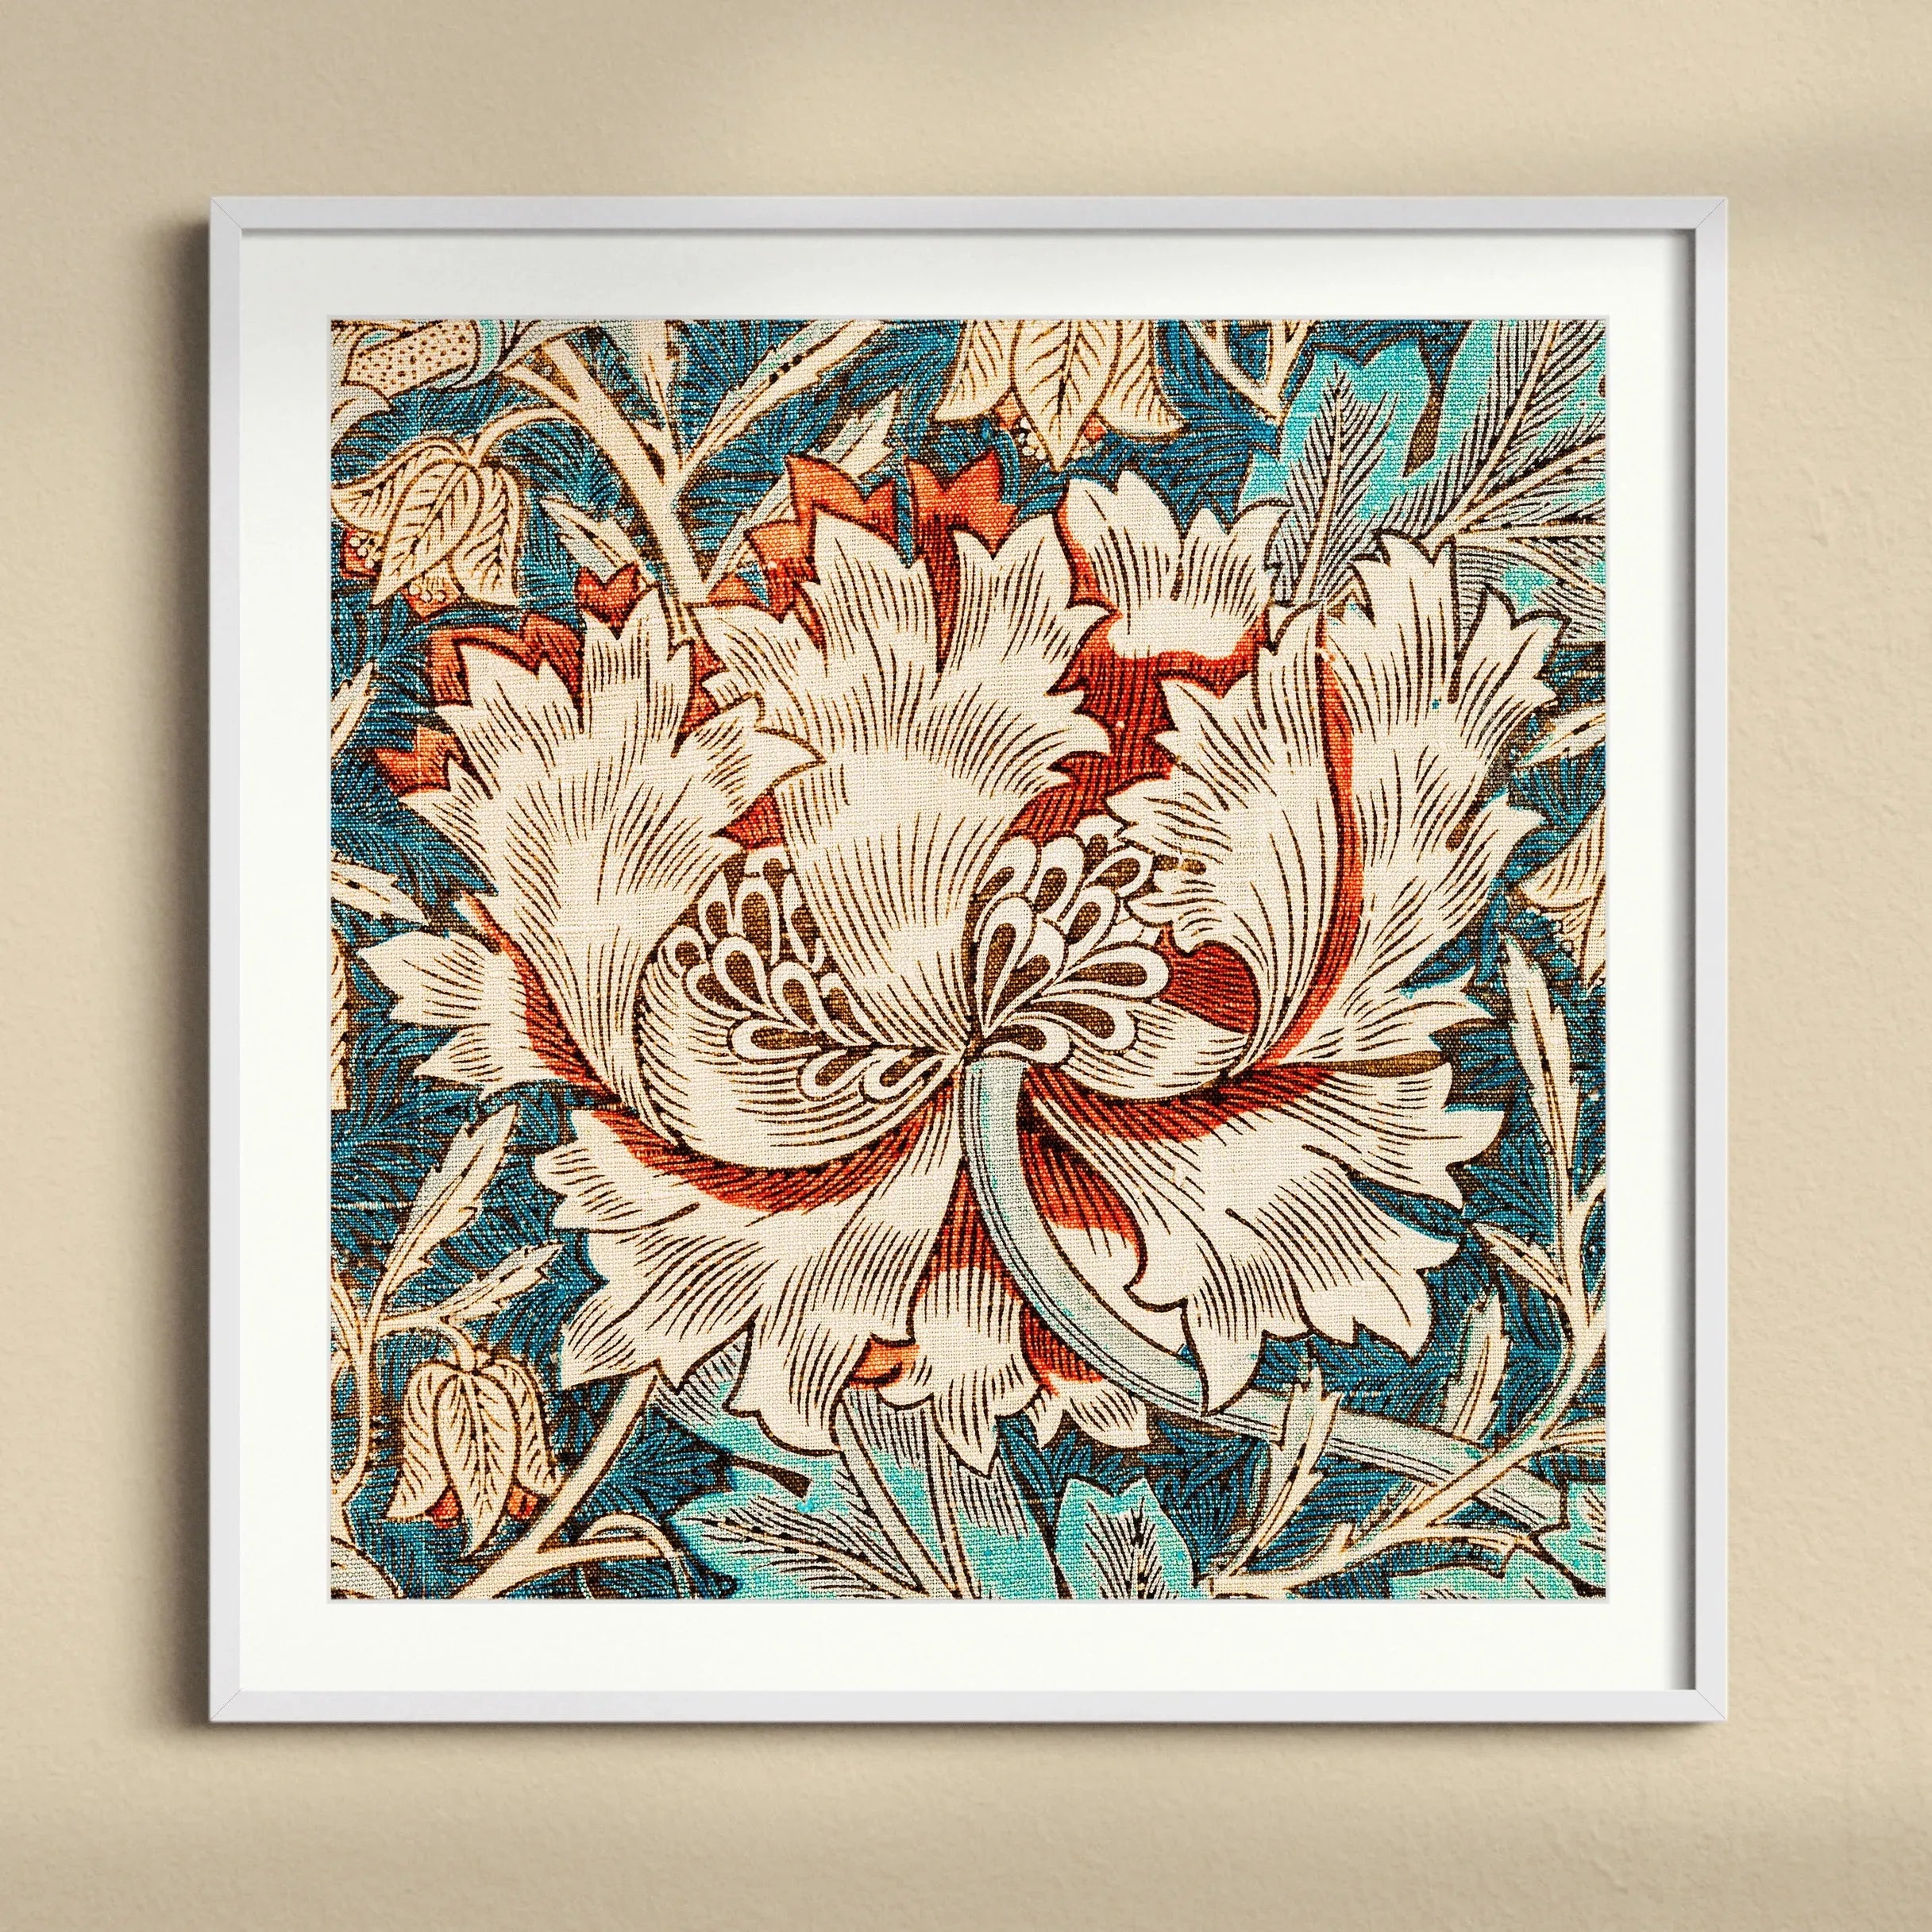 Honeysuckle Too By William Morris Framed & Mounted Print - 12’x12’ / White Frame - Posters Prints & Visual Artwork